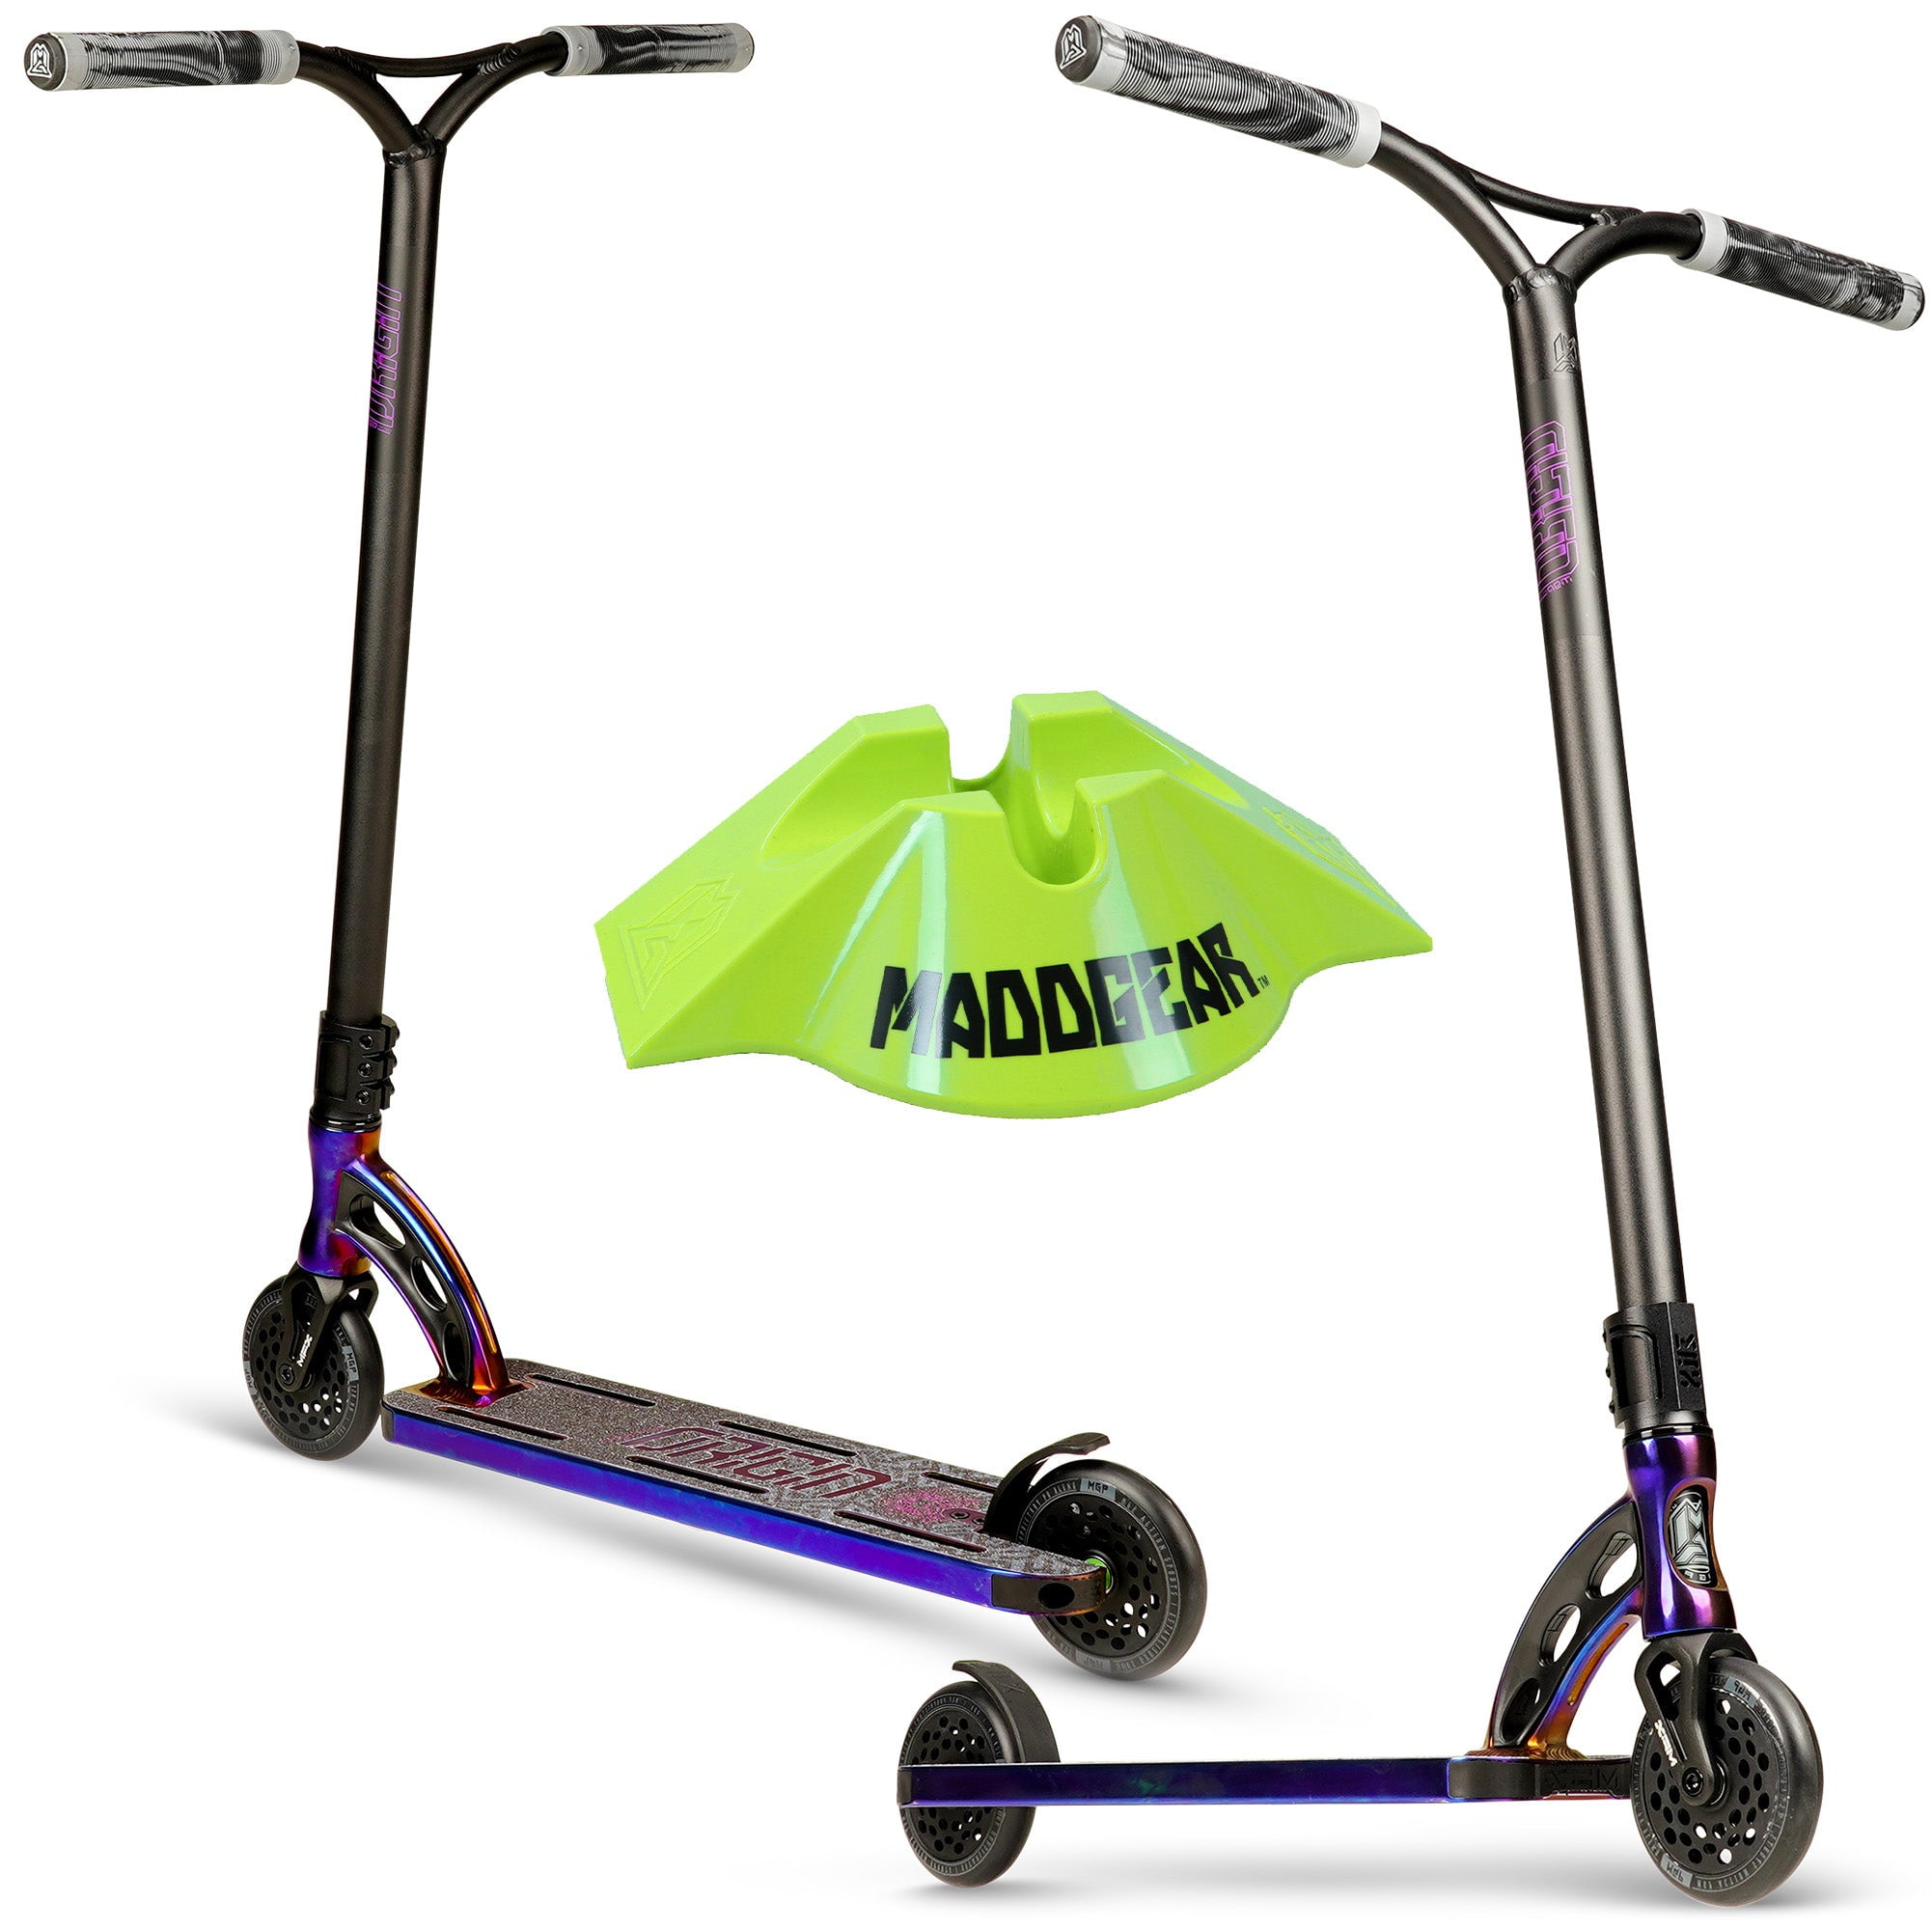 Gear MGP Origin Scooter - Pro Stunt Complete Kids 12 Years Up Free Scooter Stand Chrome Walmart.com